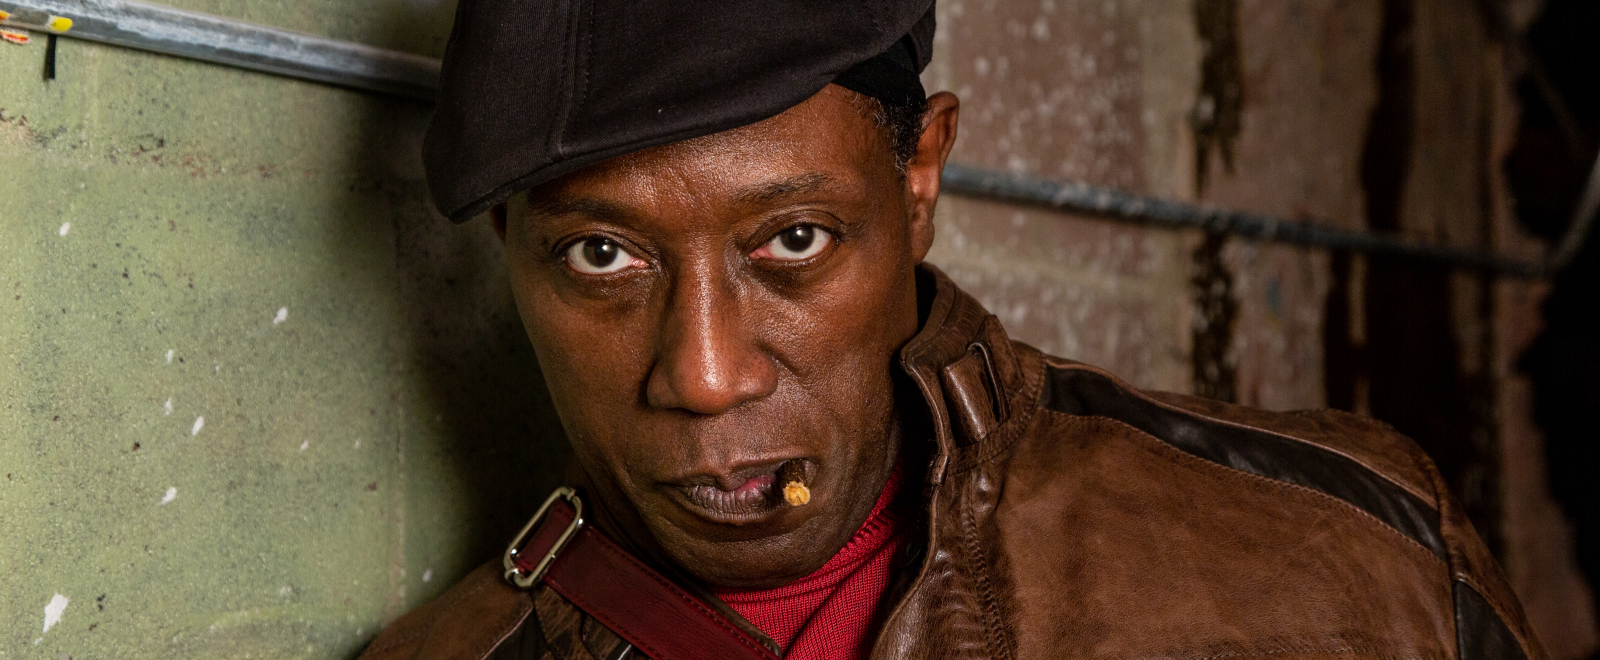 Wesley Snipes Is Back In ‘Coming 2 America’ And He’s About To Pop, Baby!